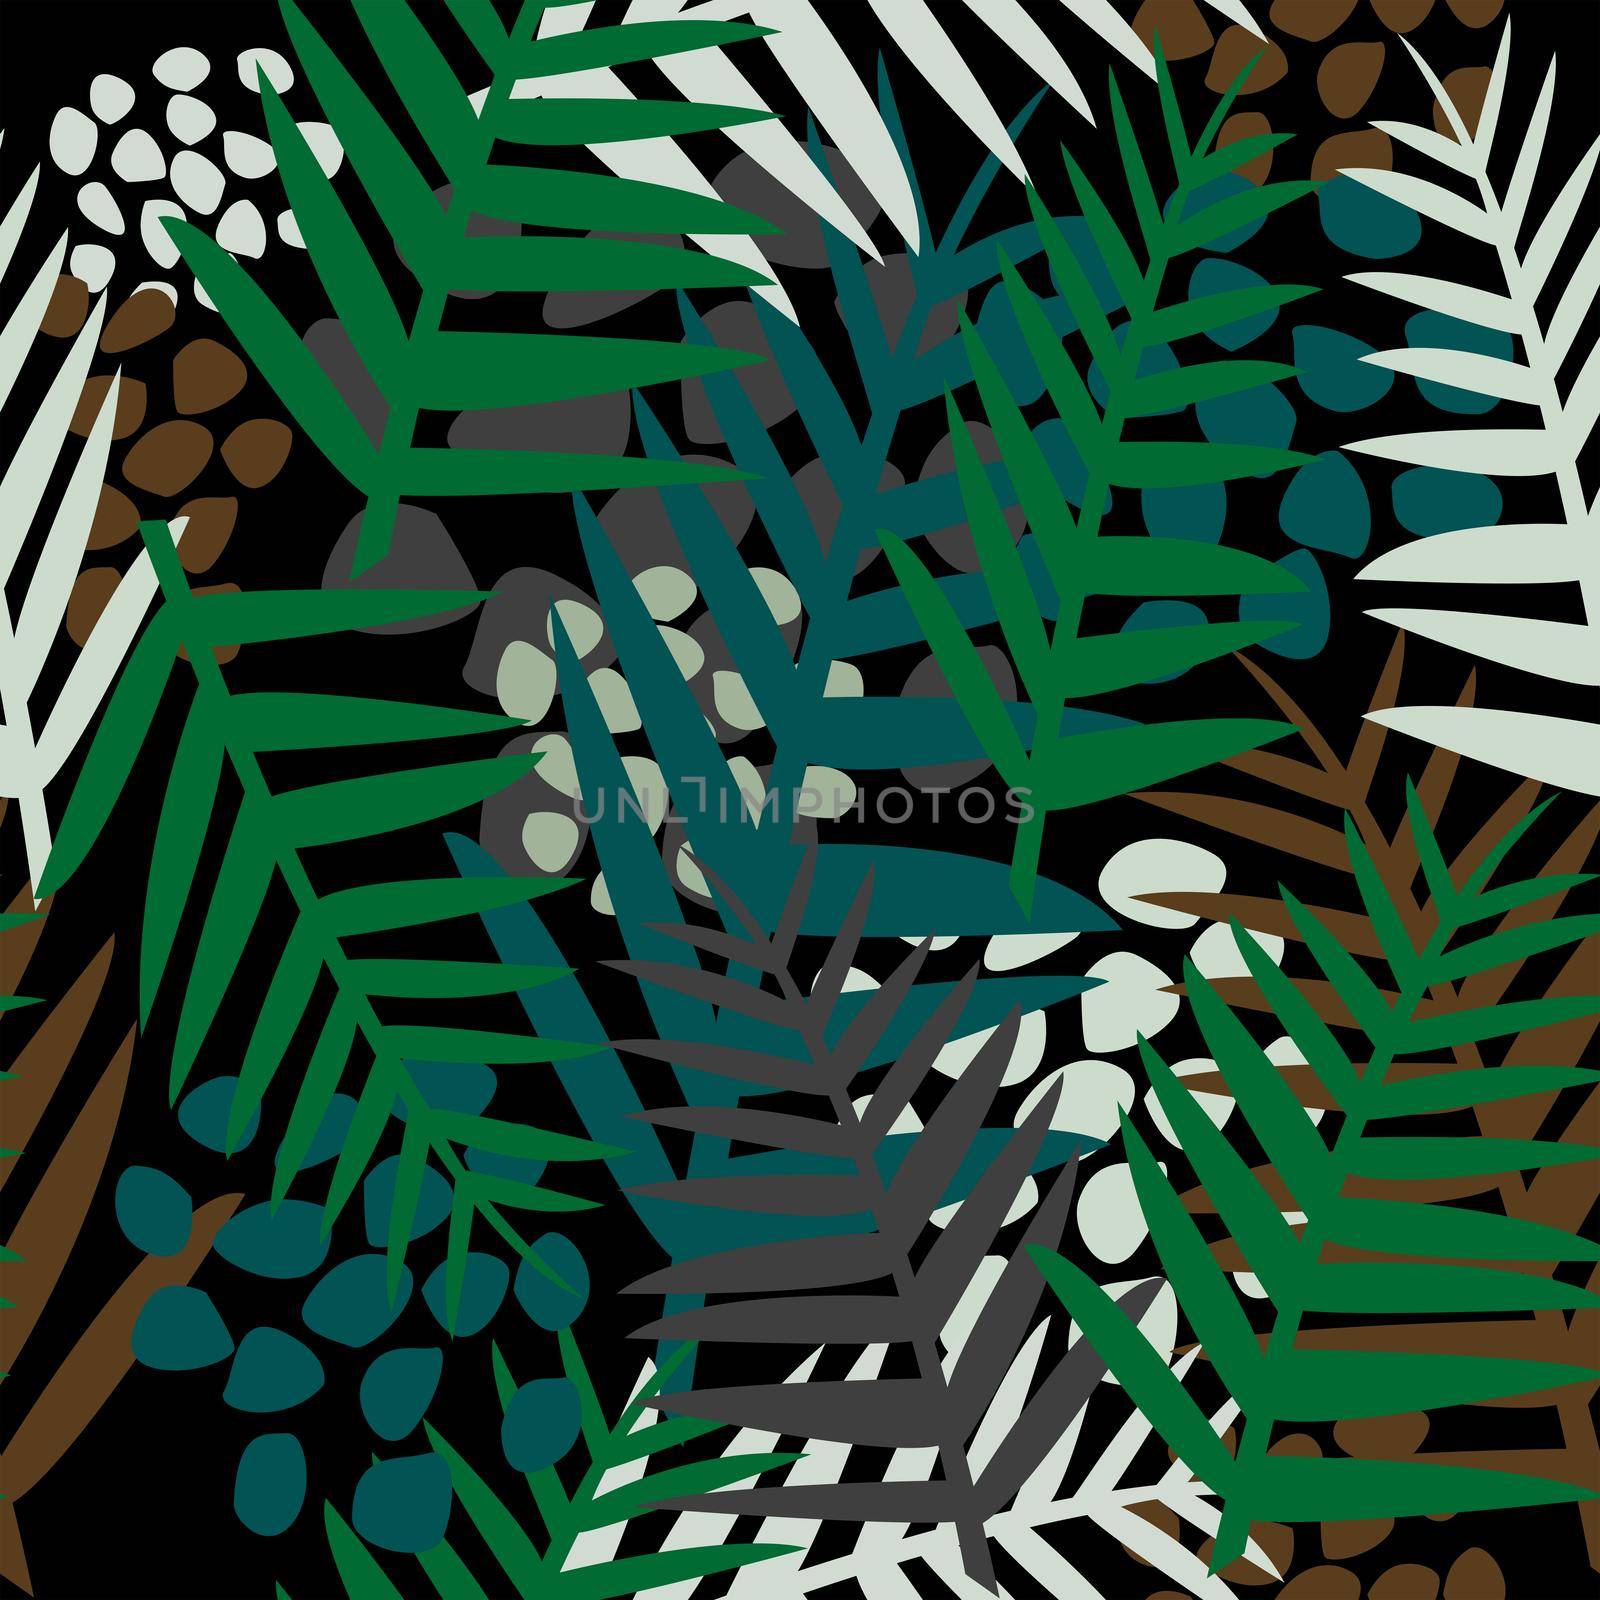 Tropical Jungle Dark Background with fern leaves by hibrida13